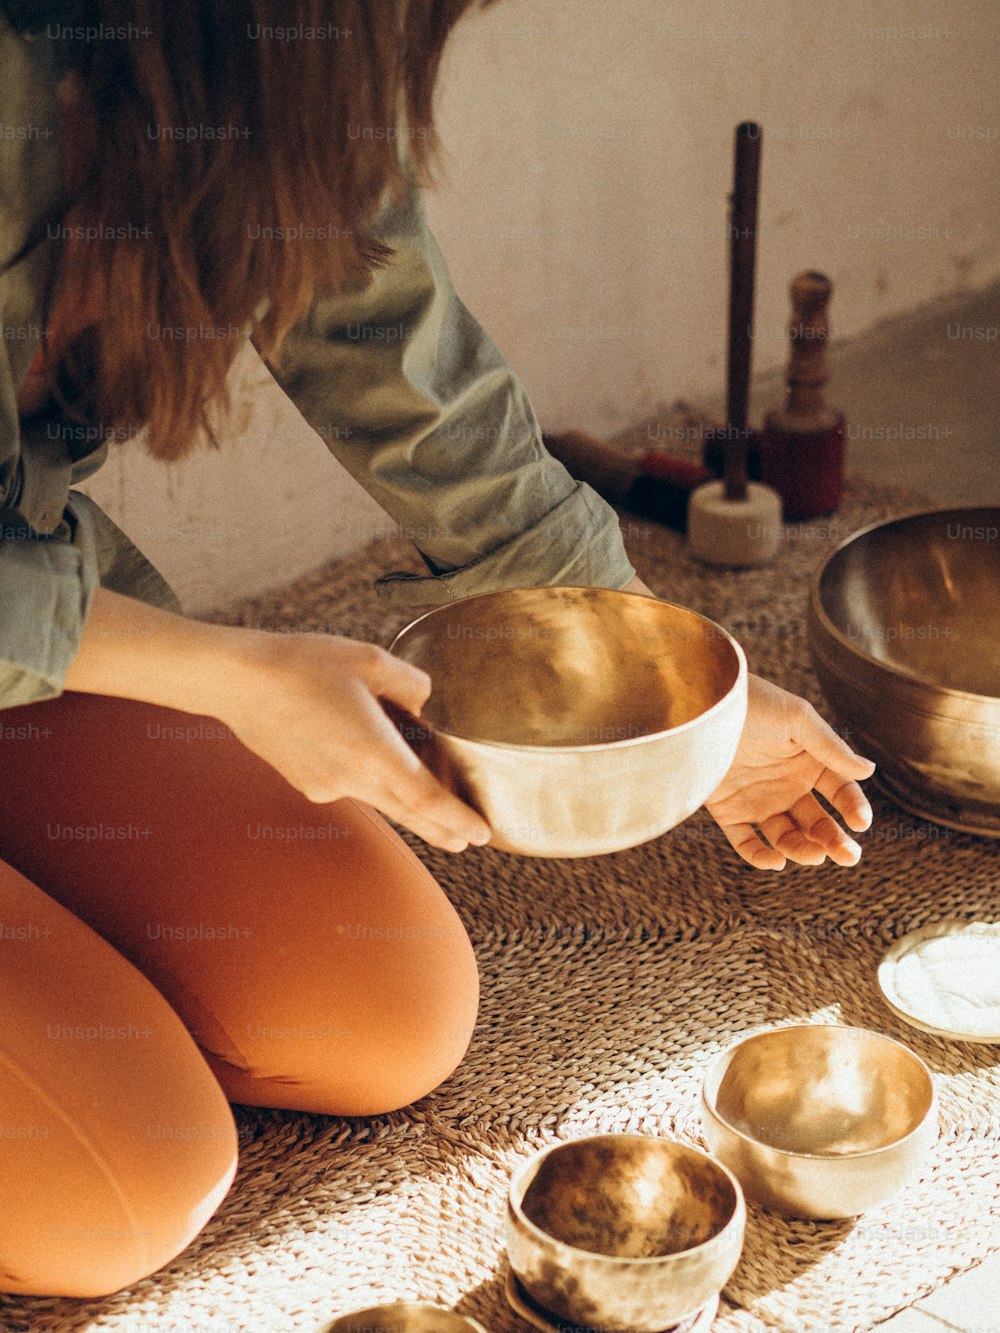 a woman sitting on the floor holding a bowl